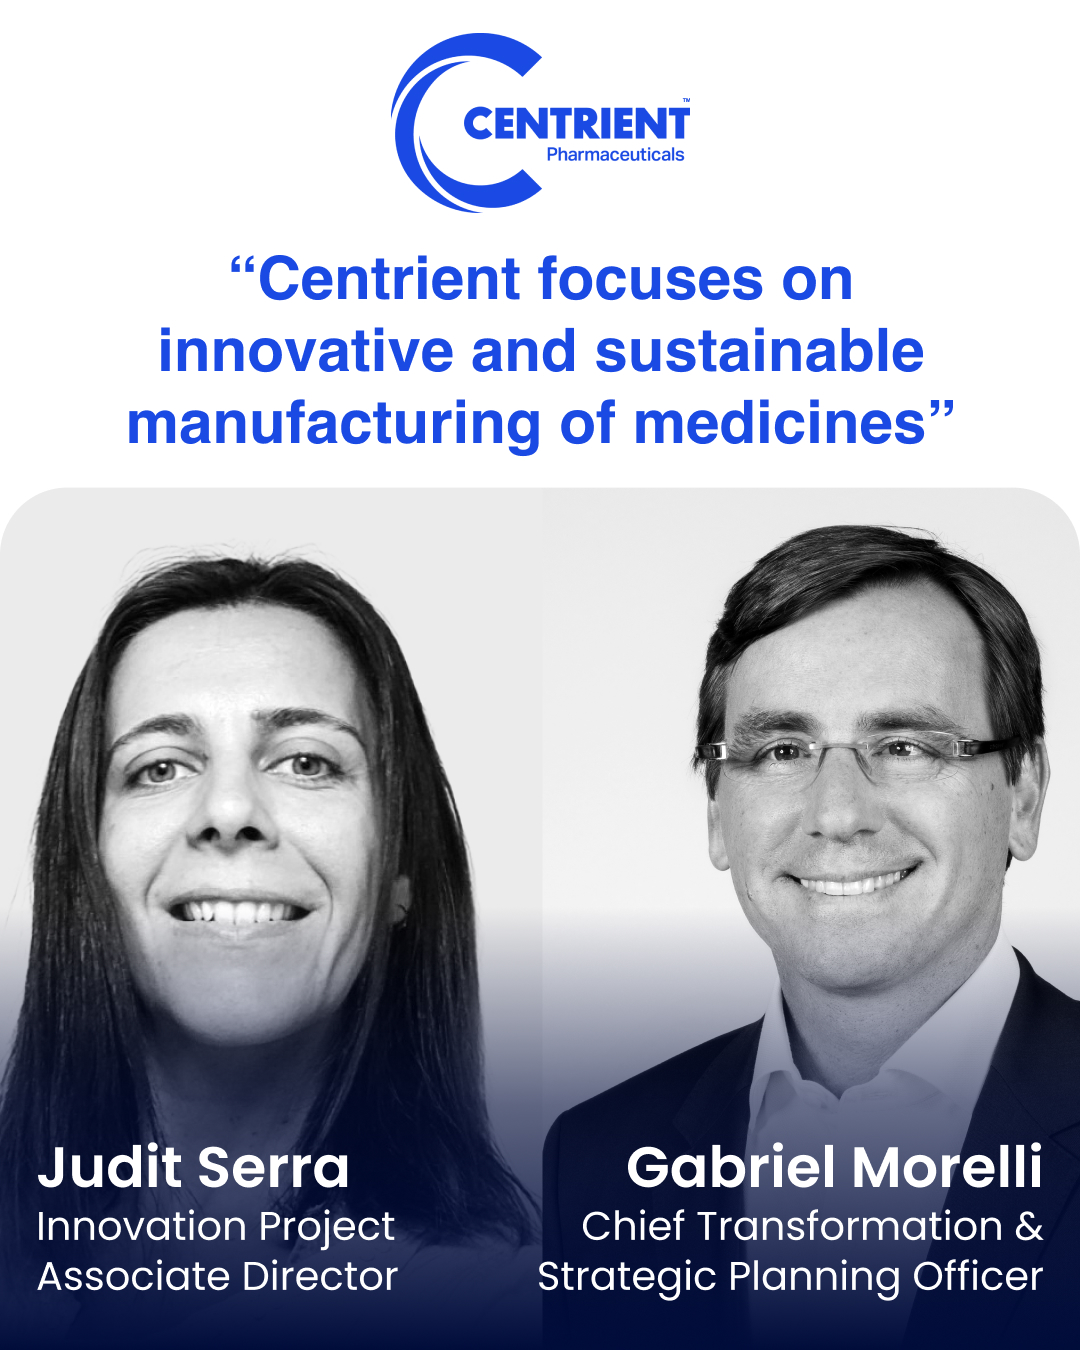 “Centrient focuses on innovative and sustainable manufacturing of medicines”